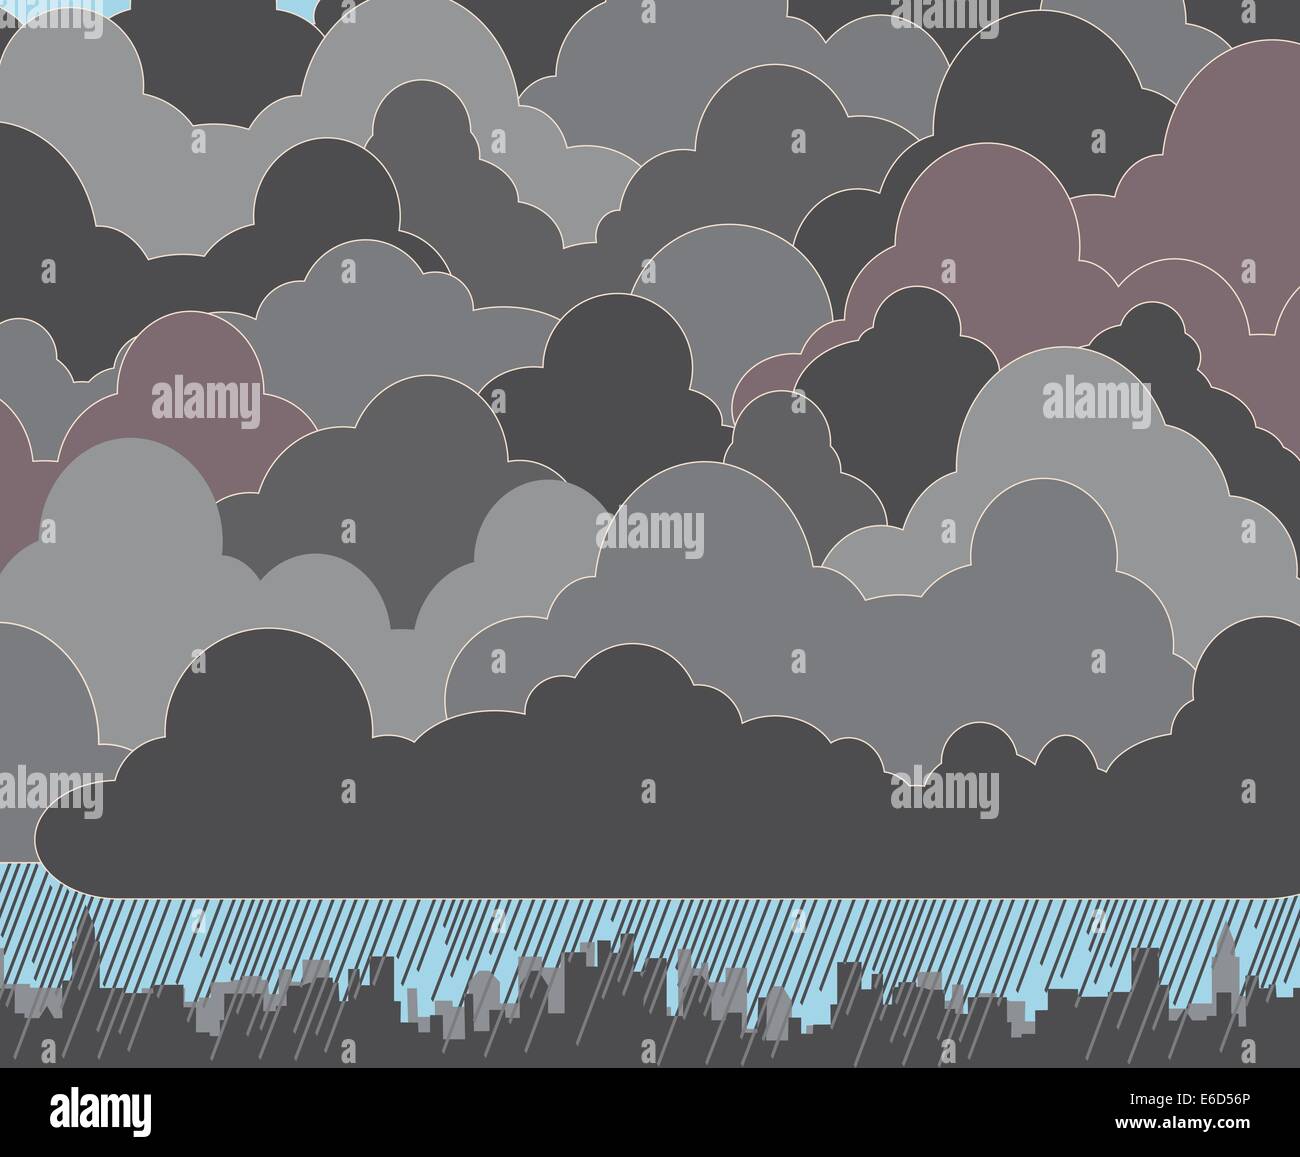 Editable vector illustration of clouds and rain Stock Vector